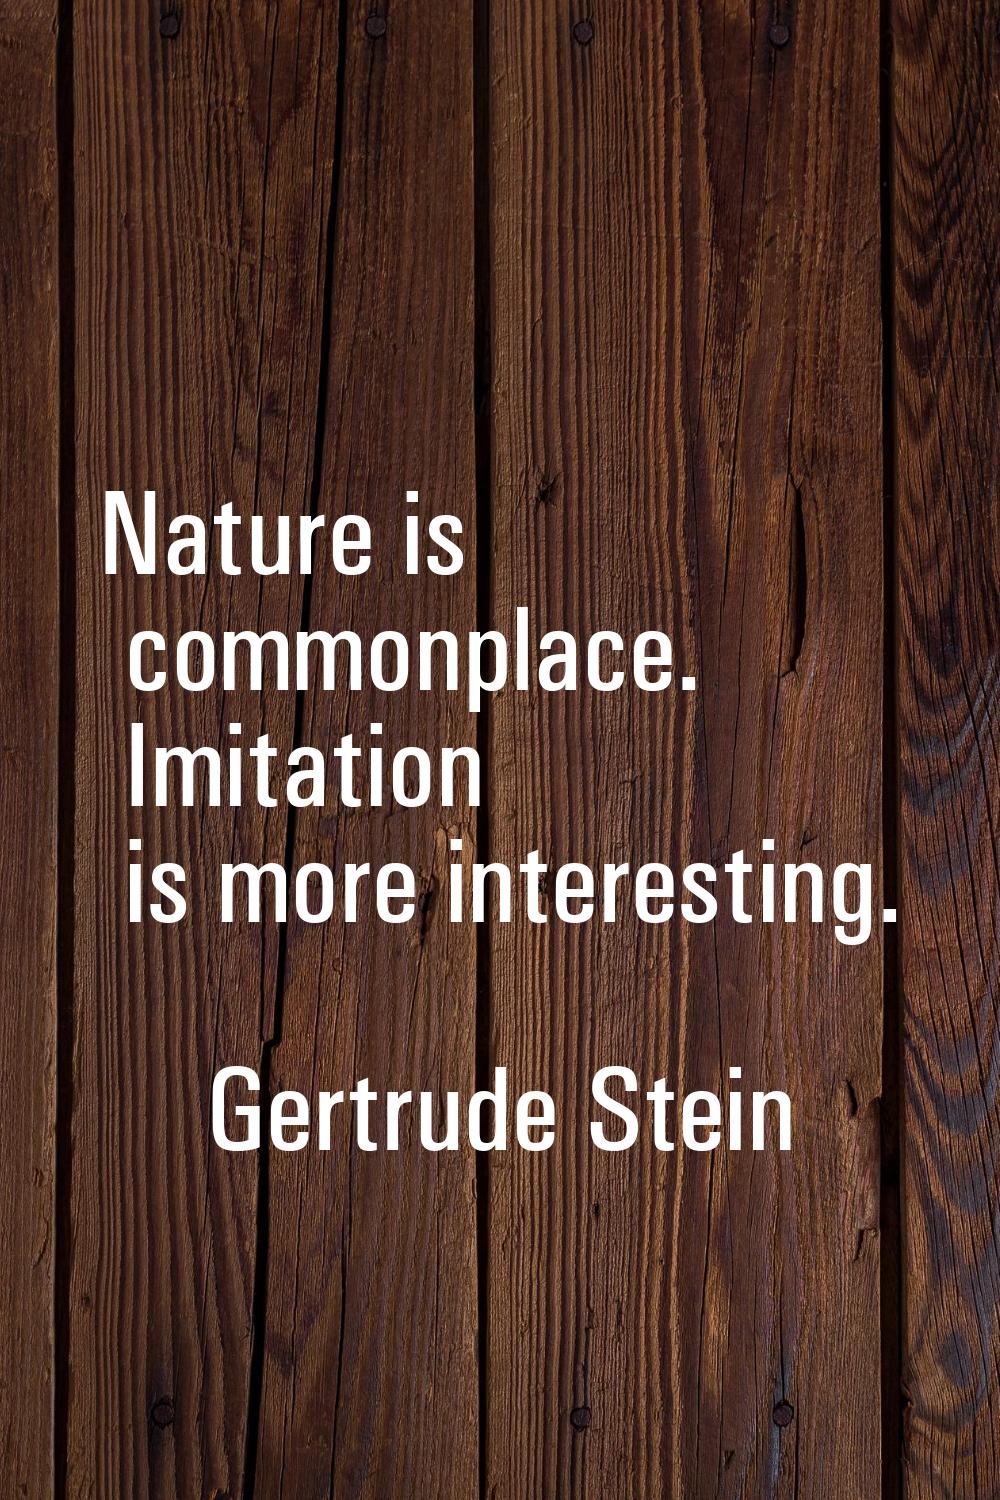 Nature is commonplace. Imitation is more interesting.